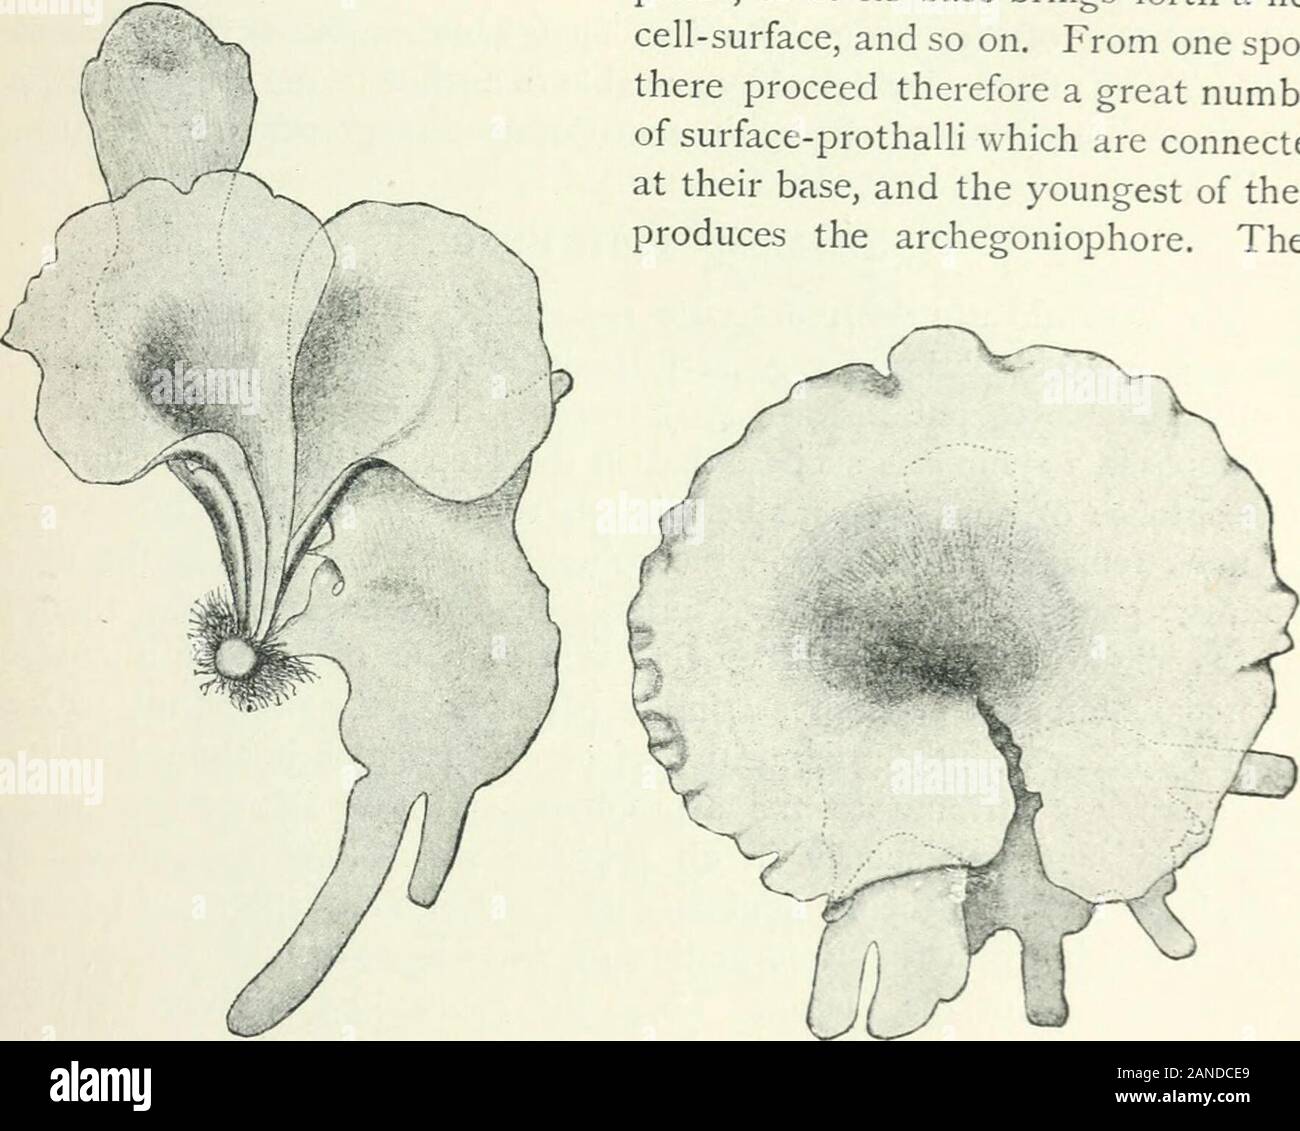 Organography of plants, especially of the archegoniatae and spermaphyta . l, Ober die Jugendzustande der PHanzen, in Flora, l.Kxii (1889^, p. 21.^ This term of Bowers is preferable to fruit-shoot, the one I used earlier. RELATIONSHIPS TO WATER. TUBERS 217 Anogramme leptophylla ^ are somewhat more complex. Its sporophyte isannual, as is that of A. chaerophylla. The prothallus, like that of A. chaero-phylla, is a spathulate cell-surface which is funnel-shaped and not flat(Fig. 159) and which can branch and form lobes somewhat after thefashion of that in Vittaria. The tuber-like archegoniophore, Stock Photo